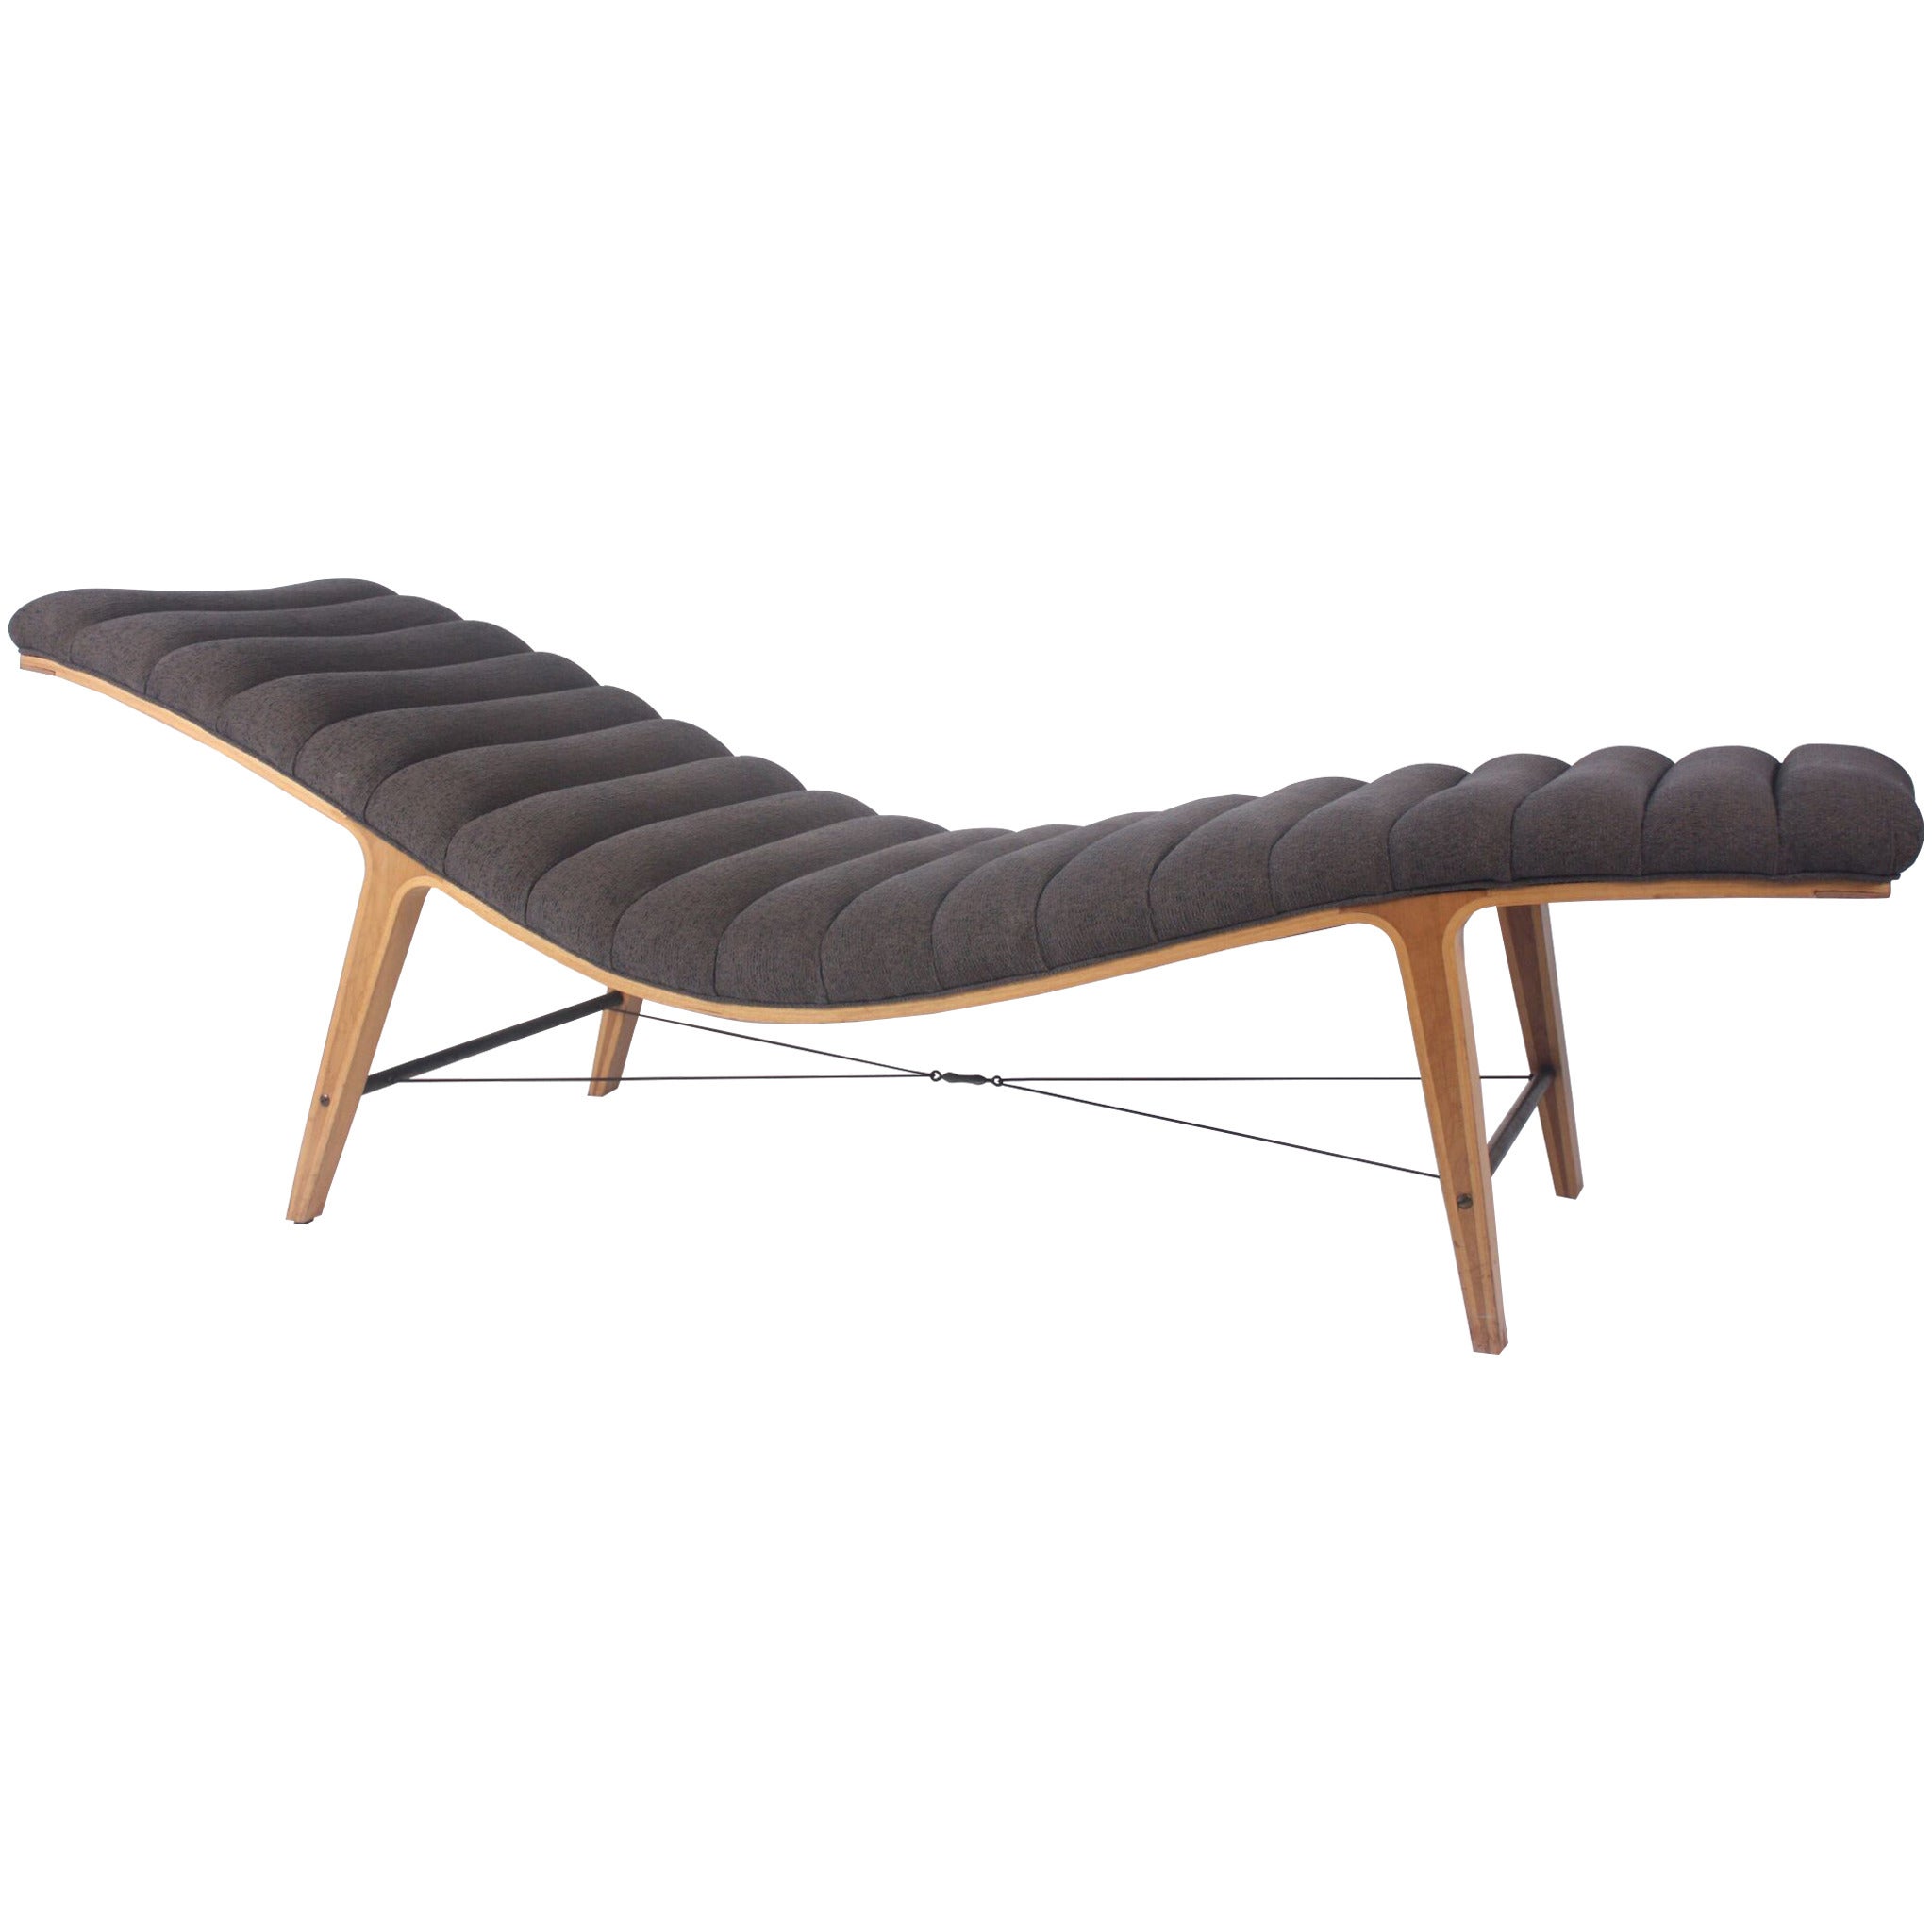 Edward Wormley for Dunbar "Listen to Me" Chaise, circa 1949 For Sale